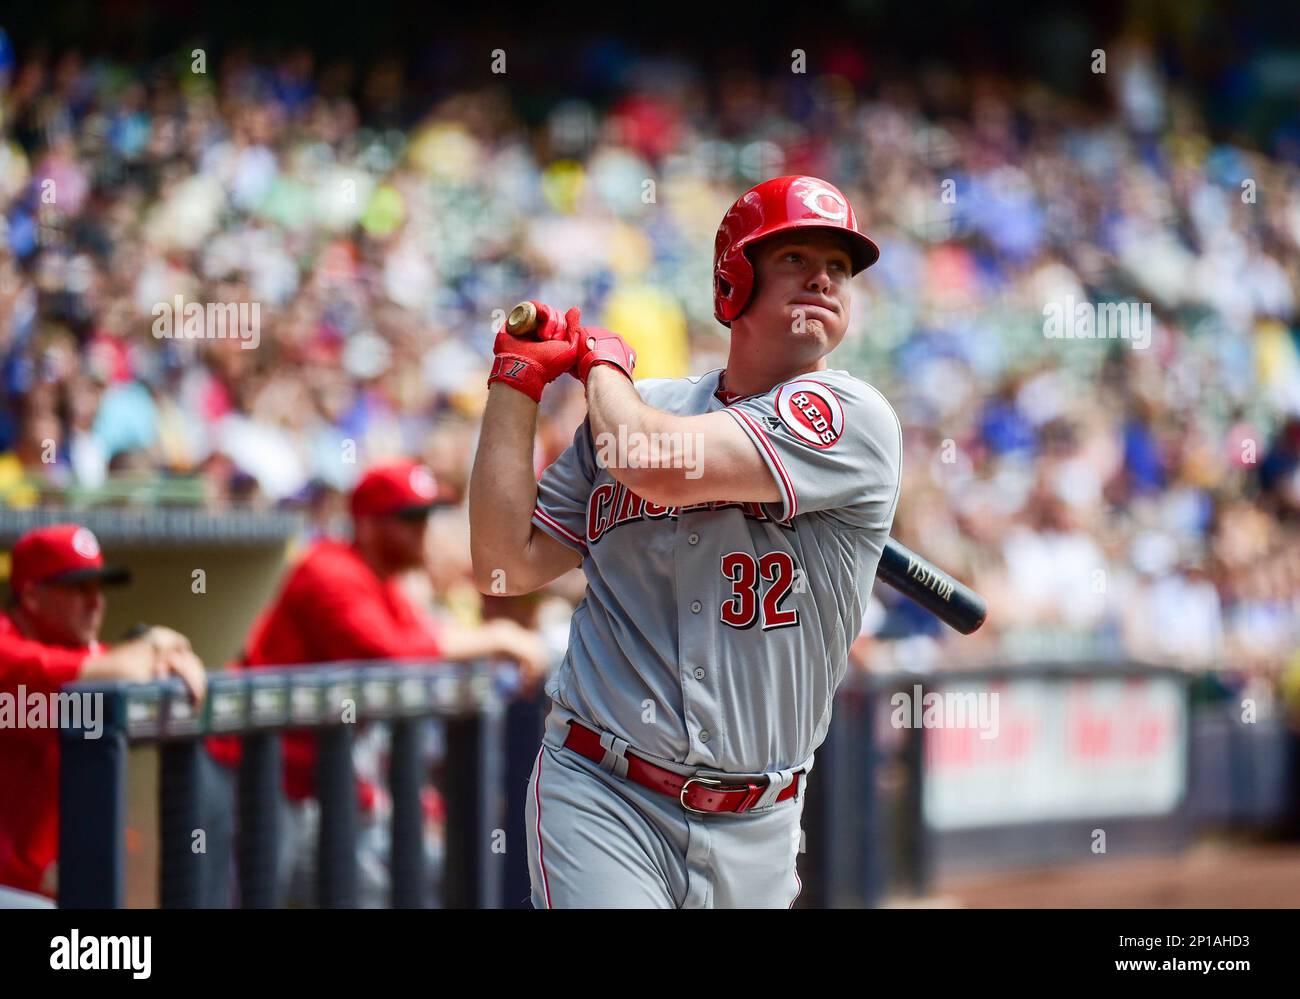 May 29, 2016: Cincinnati Reds right fielder Jay Bruce (32) warms up a MLB  game Between the Cincinnati Reds and the Milwaukee Brewers at Miller Park,  Milwaukee, WI. (Photo by Merle Laswell/Icon